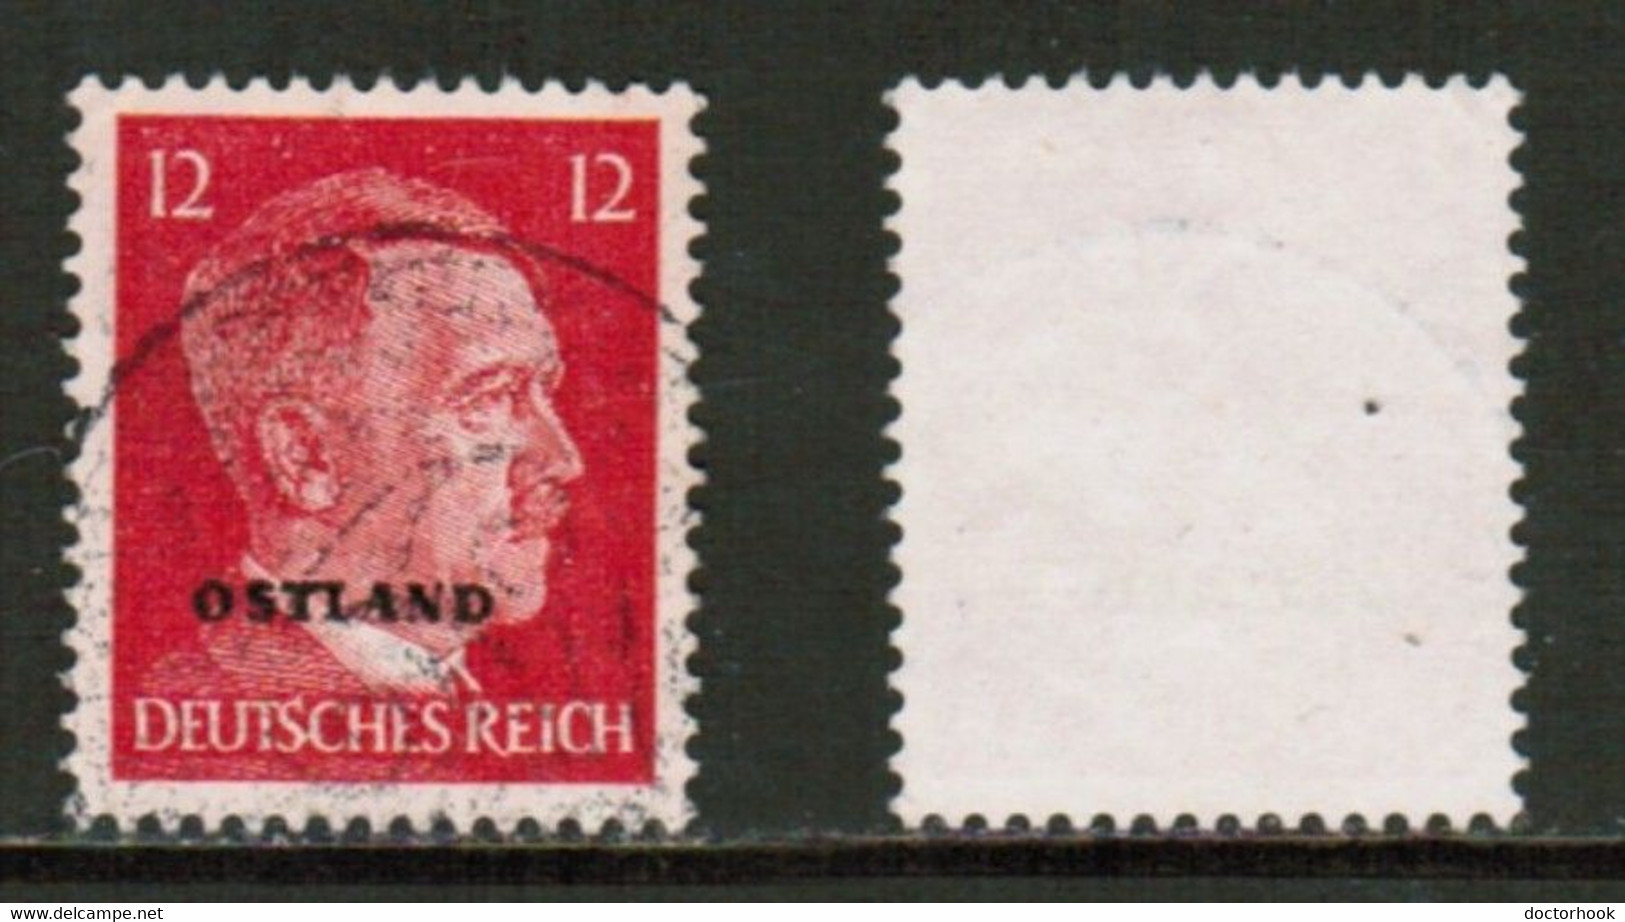 RUSSIA---German Occupation   Scott # N 16 USED (CONDITION AS PER SCAN) (Stamp Scan # 847-6) - 1941-43 Bezetting: Duitsland